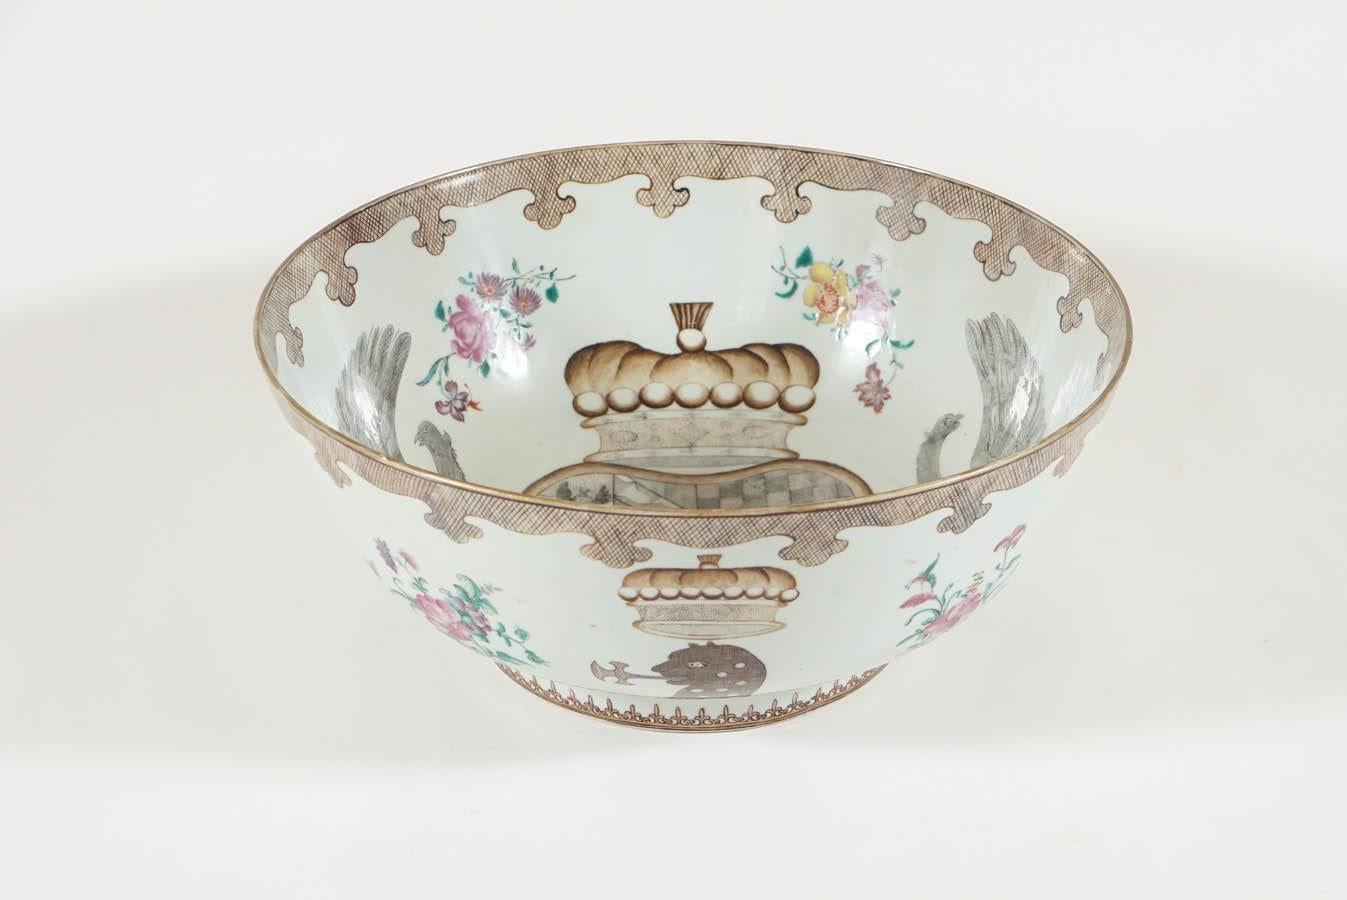 An exquisite and rare circa 1750 Chinese Export porcelain punch bowl of massive size decorated with the coat-of-arms, crest, and motto of William Pleydell-Bouverie, 1st Earl of Radnor, England.  The interior with floral decoration and coat of arms